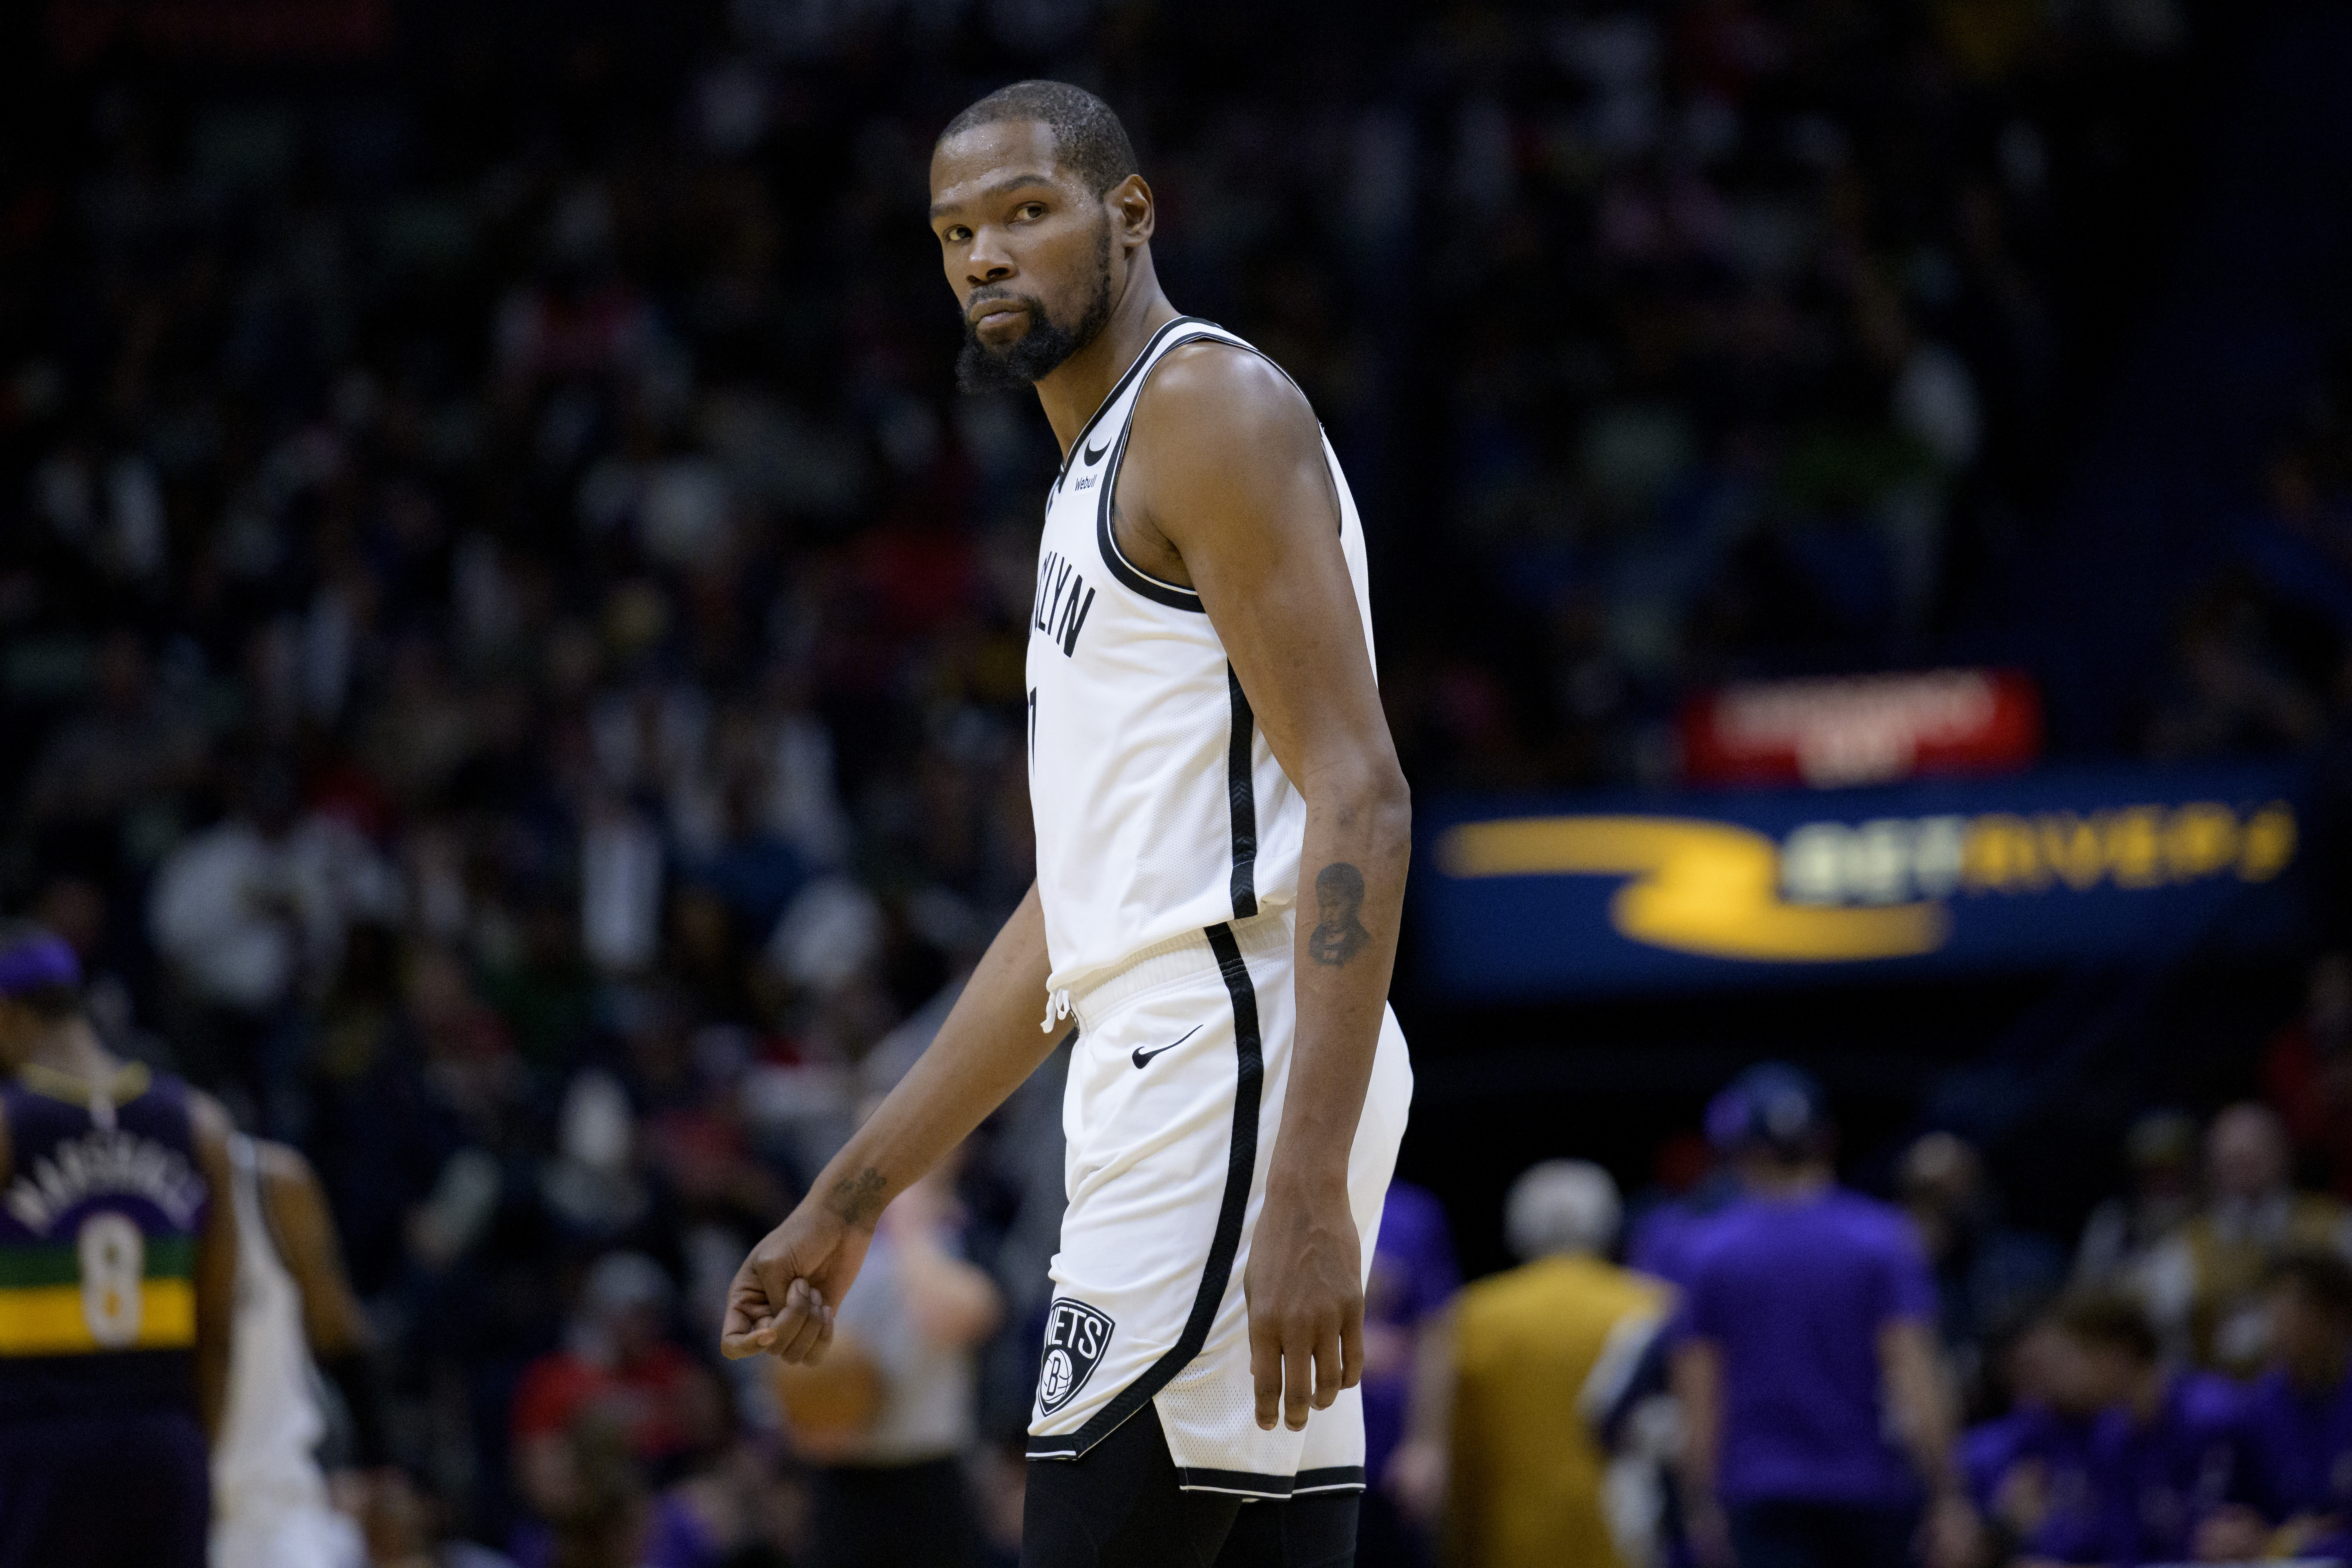 SUNS COMPLETE TRADE FOR KEVIN DURANT, T.J. WARREN